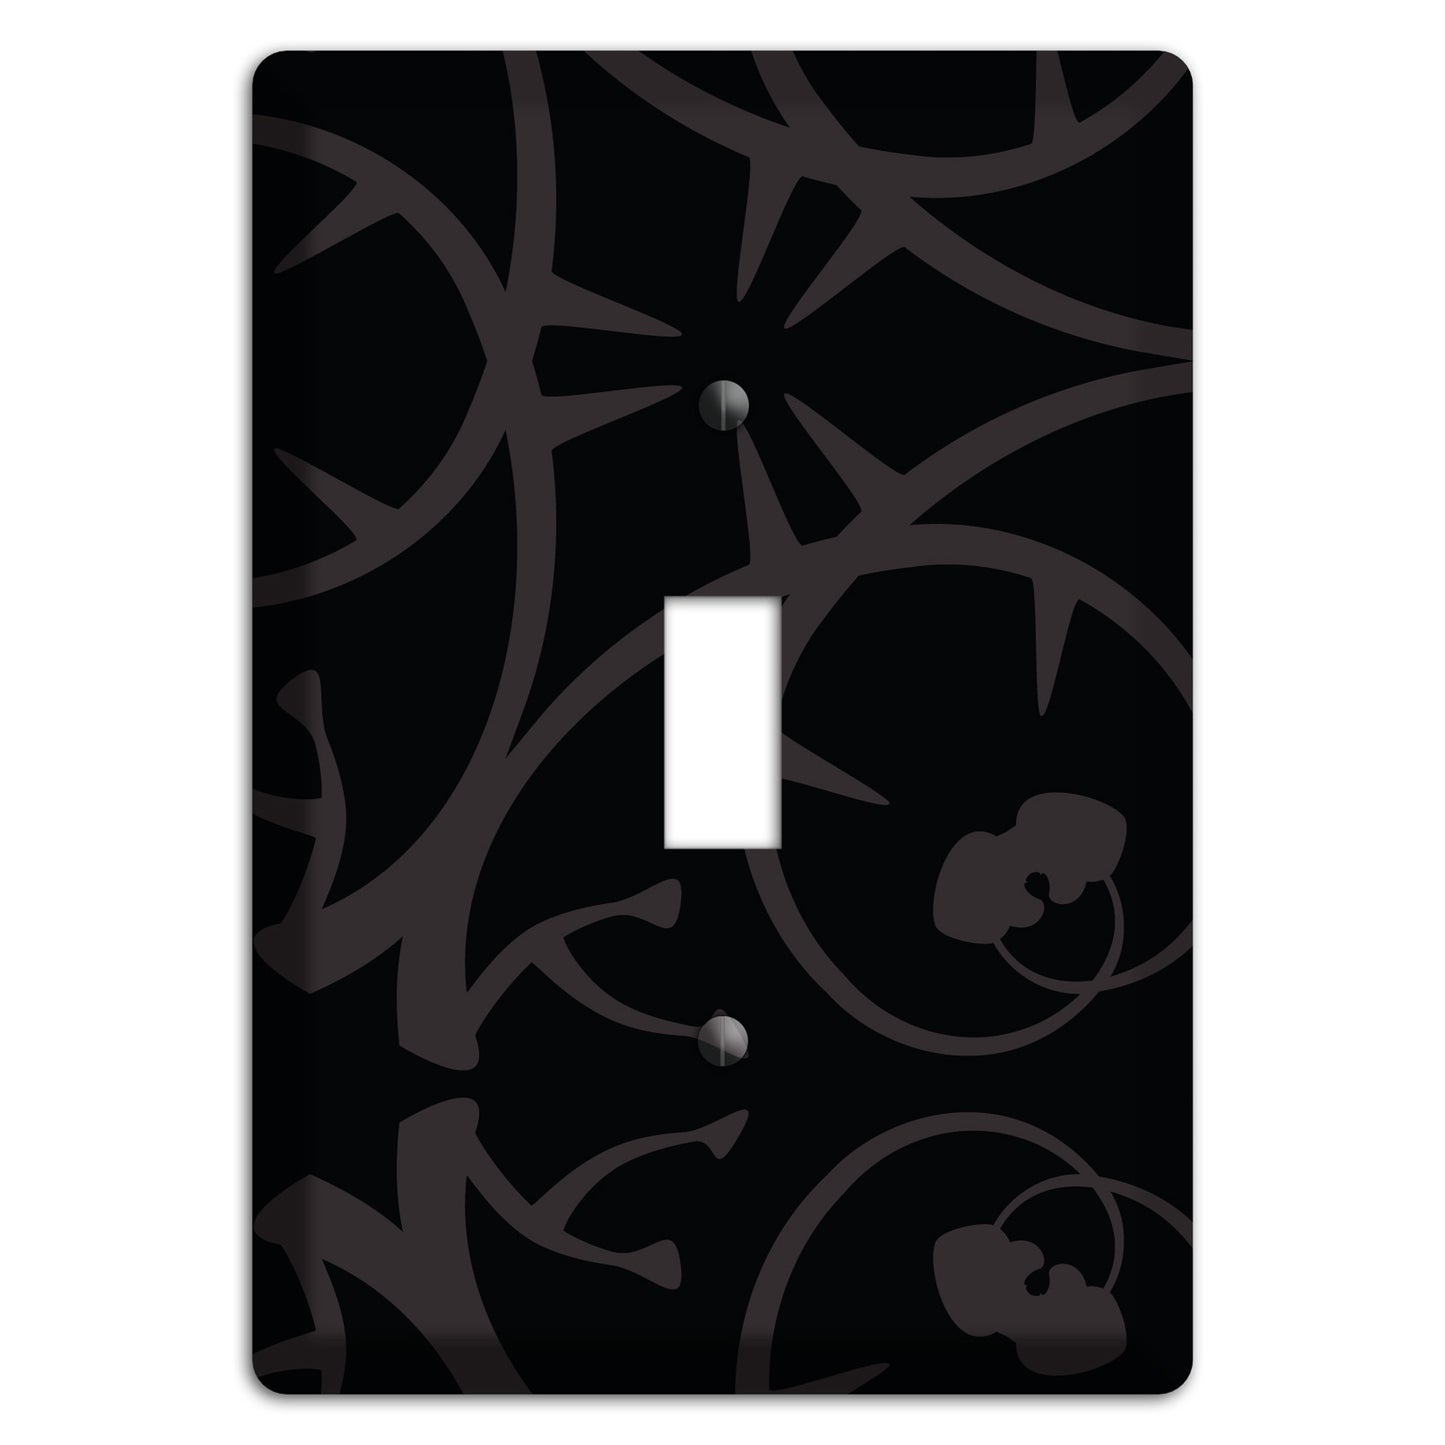 Black with Grey Abstract Swirl Cover Plates